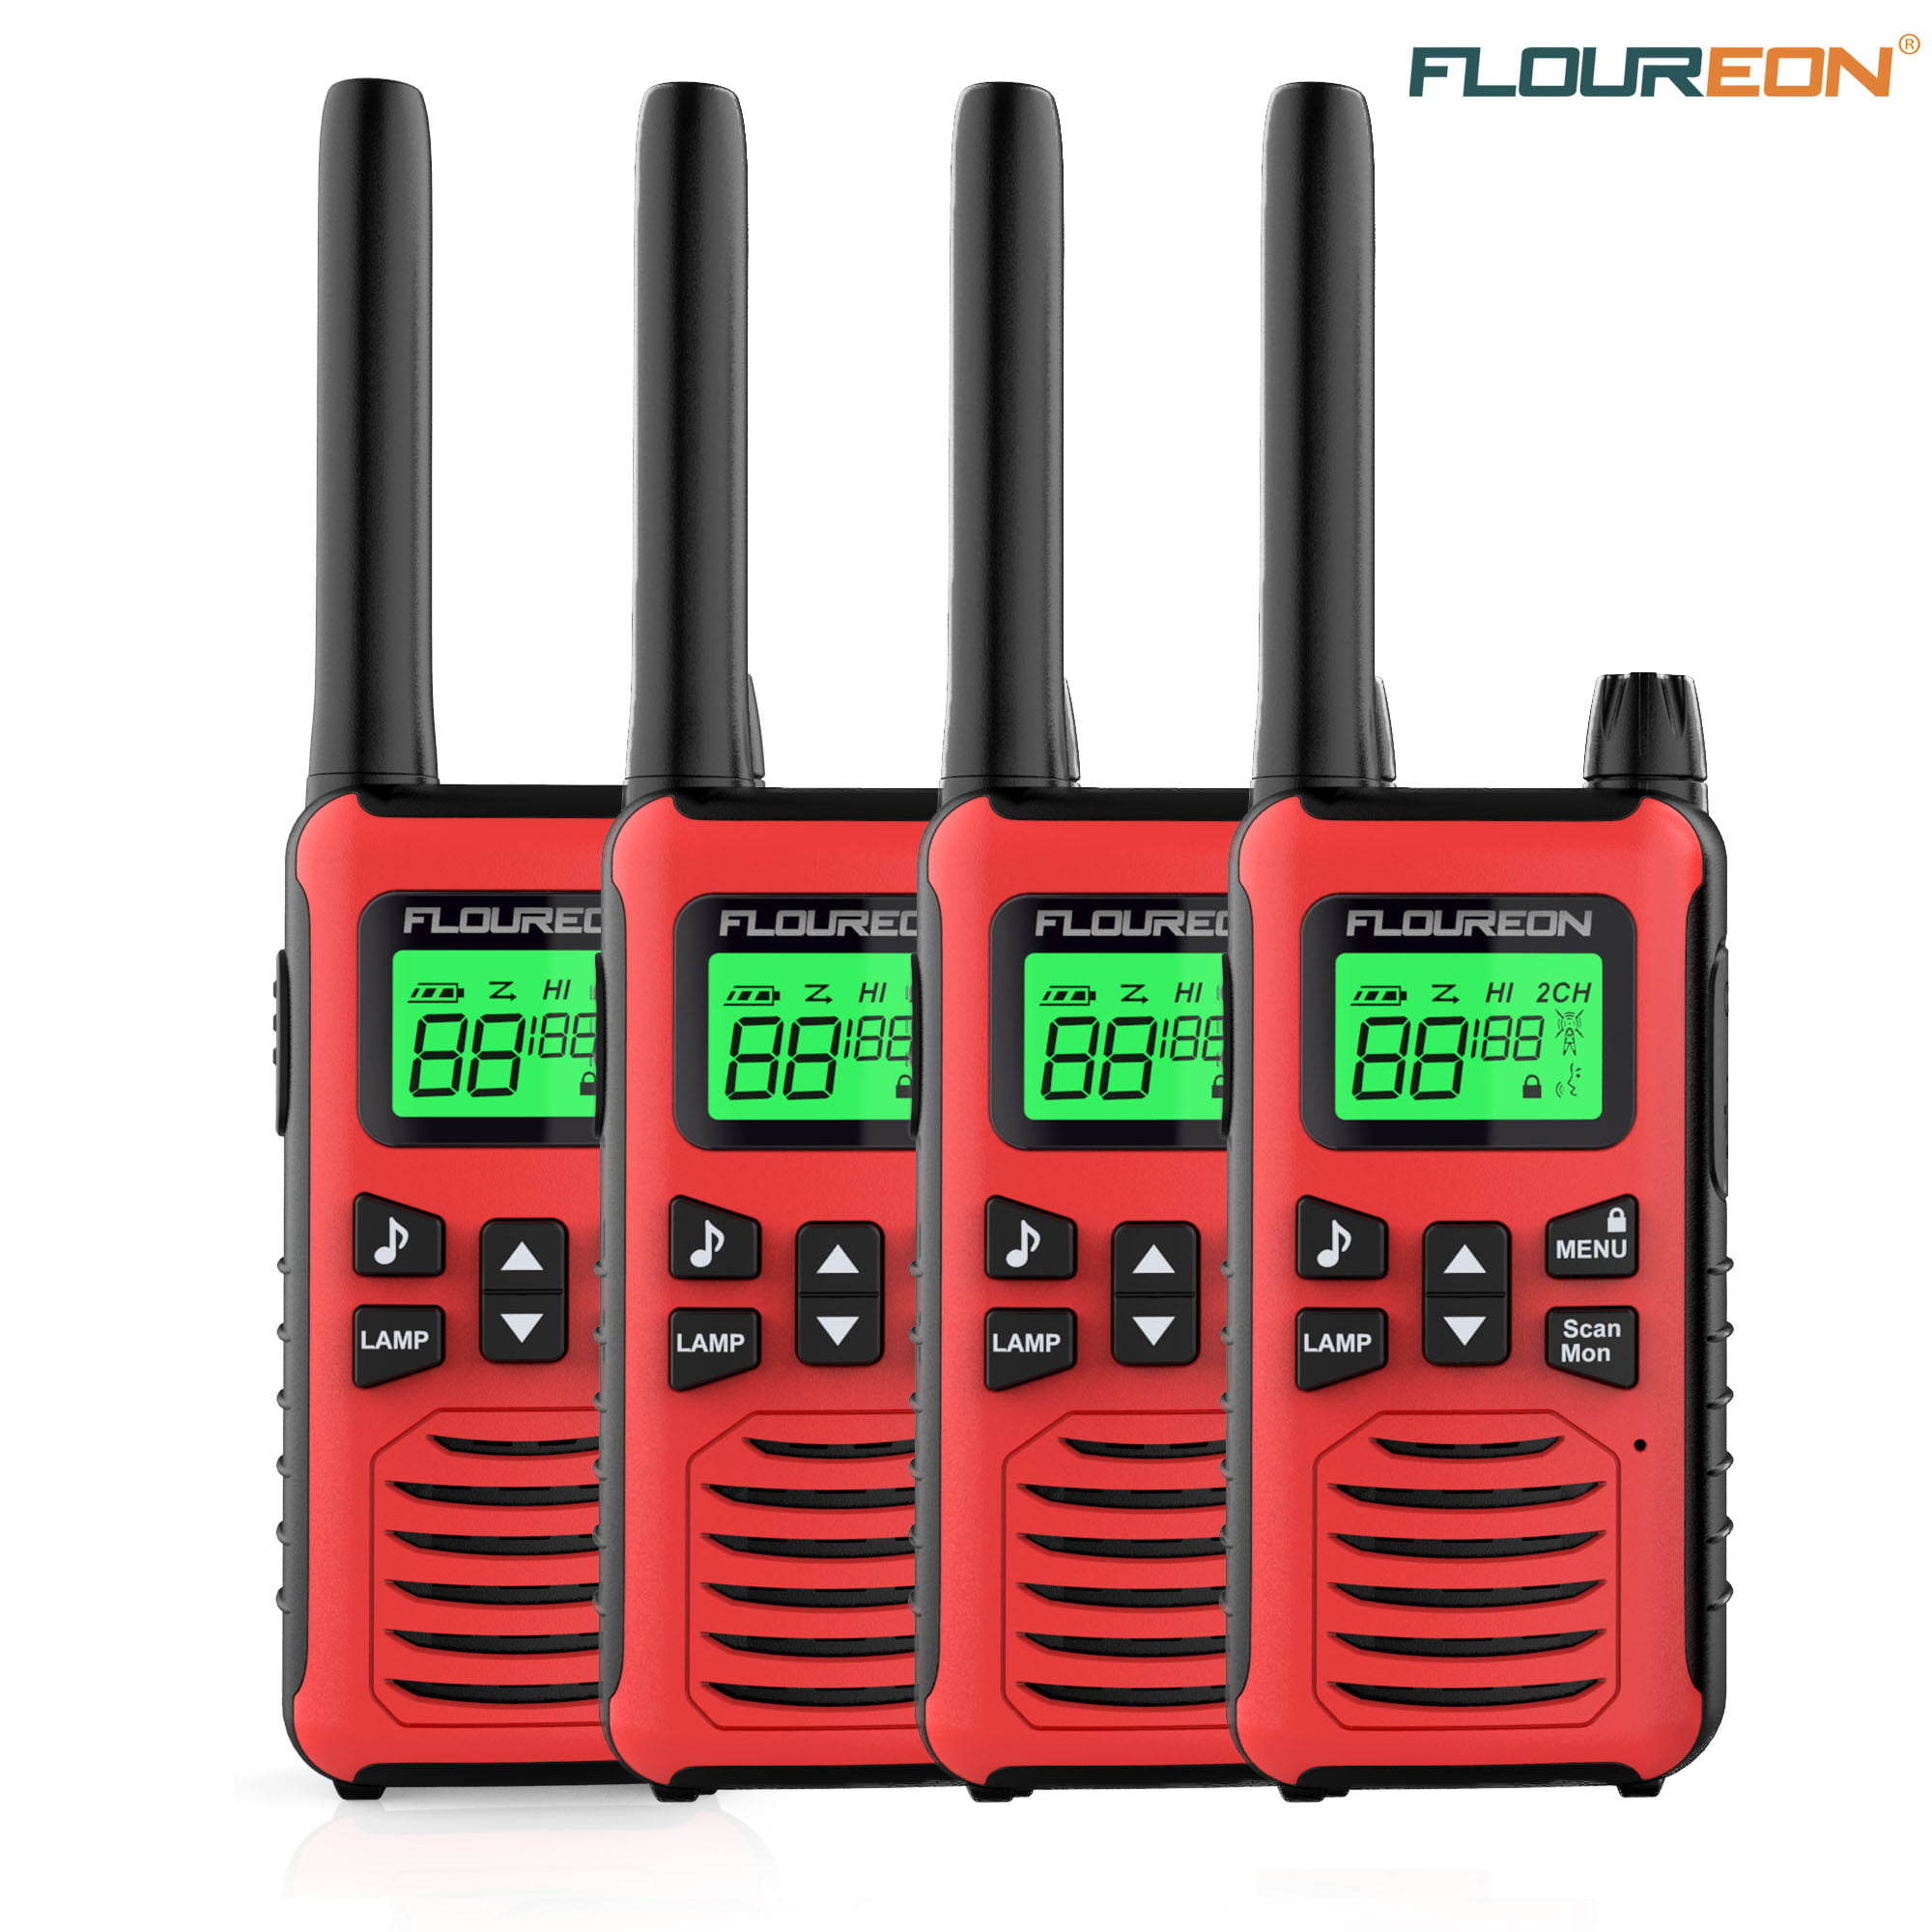 Professional Rechargeable Walkie Talkies,MOICO Long Range Two Way Radios for Adults up to 5 Miles in Open Area,Handheld Talkies Talky with 22 Channels FRS/GMRS VOX Scan LED Flashlight Yellow 